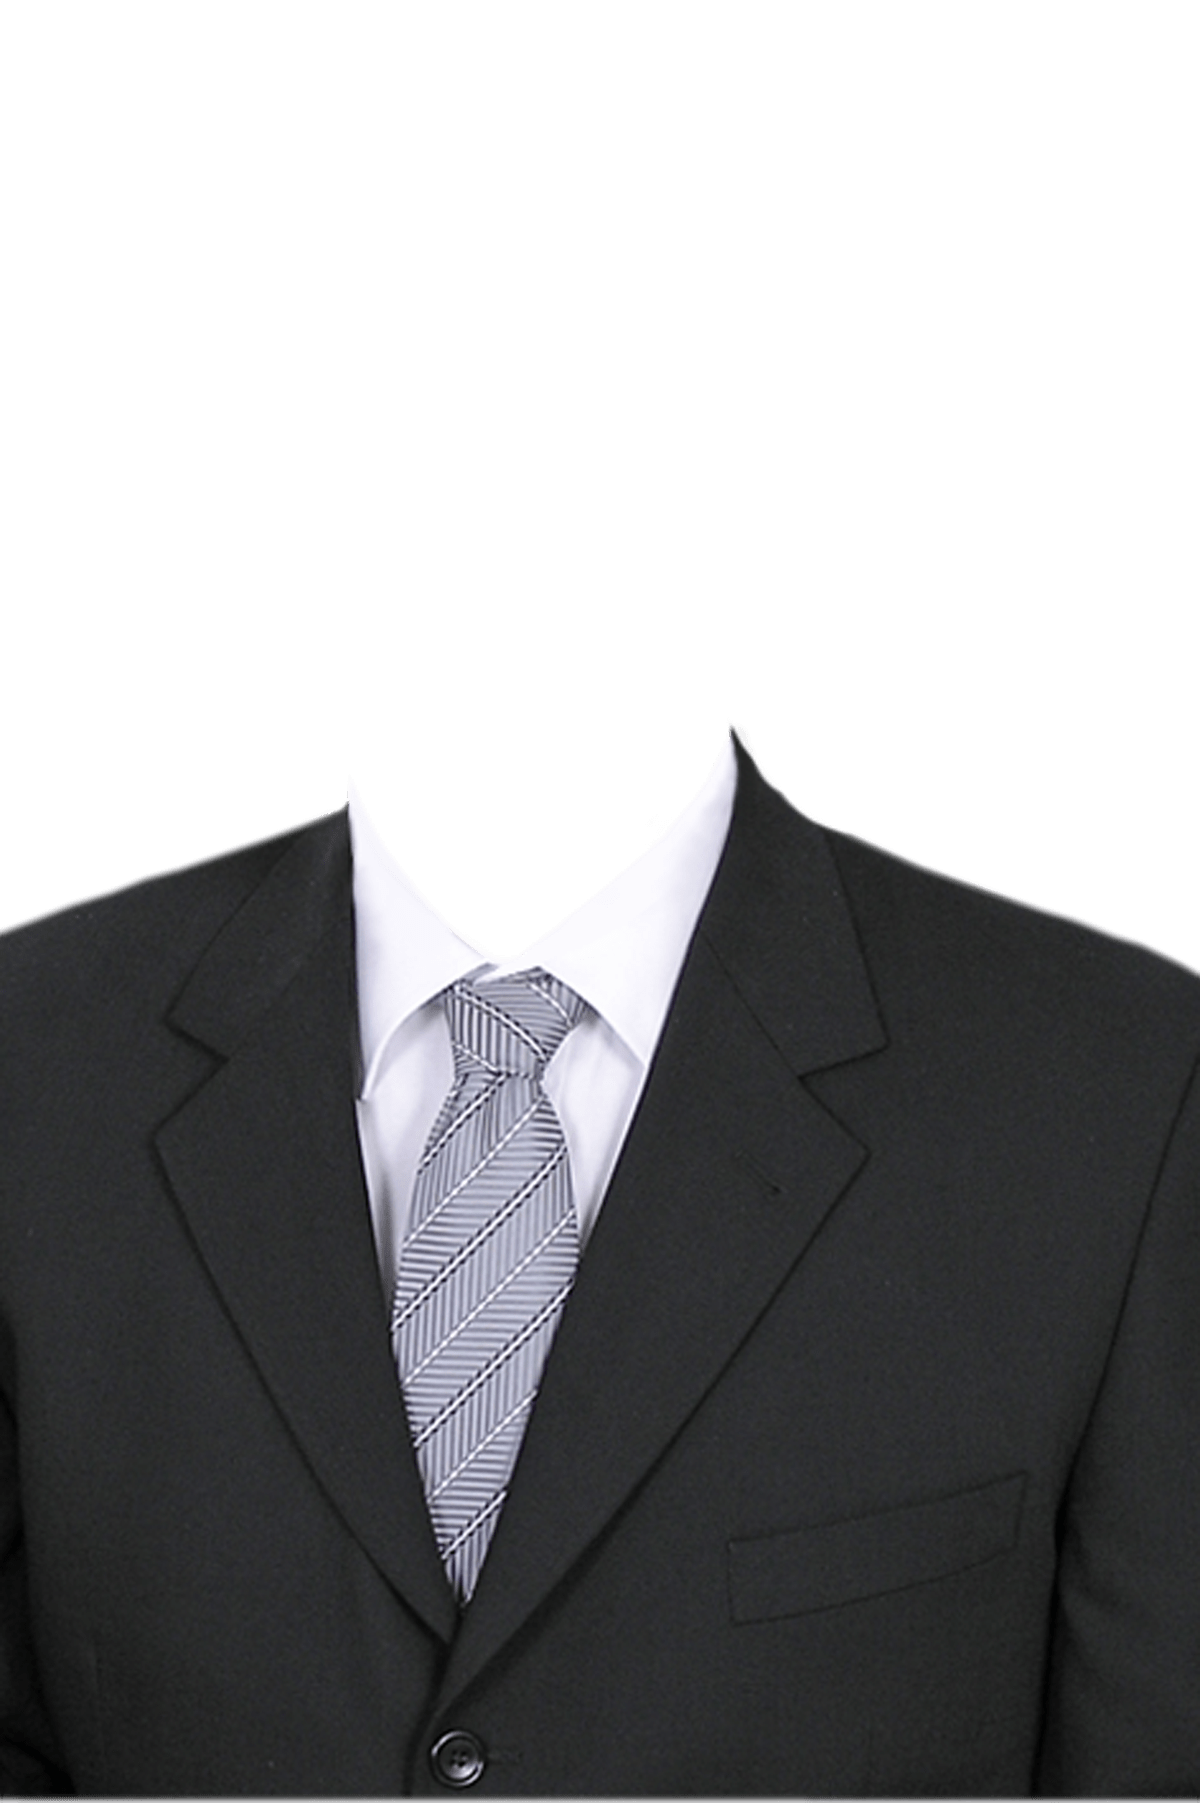 Man In A Suit Template transparent PNG - StickPNG